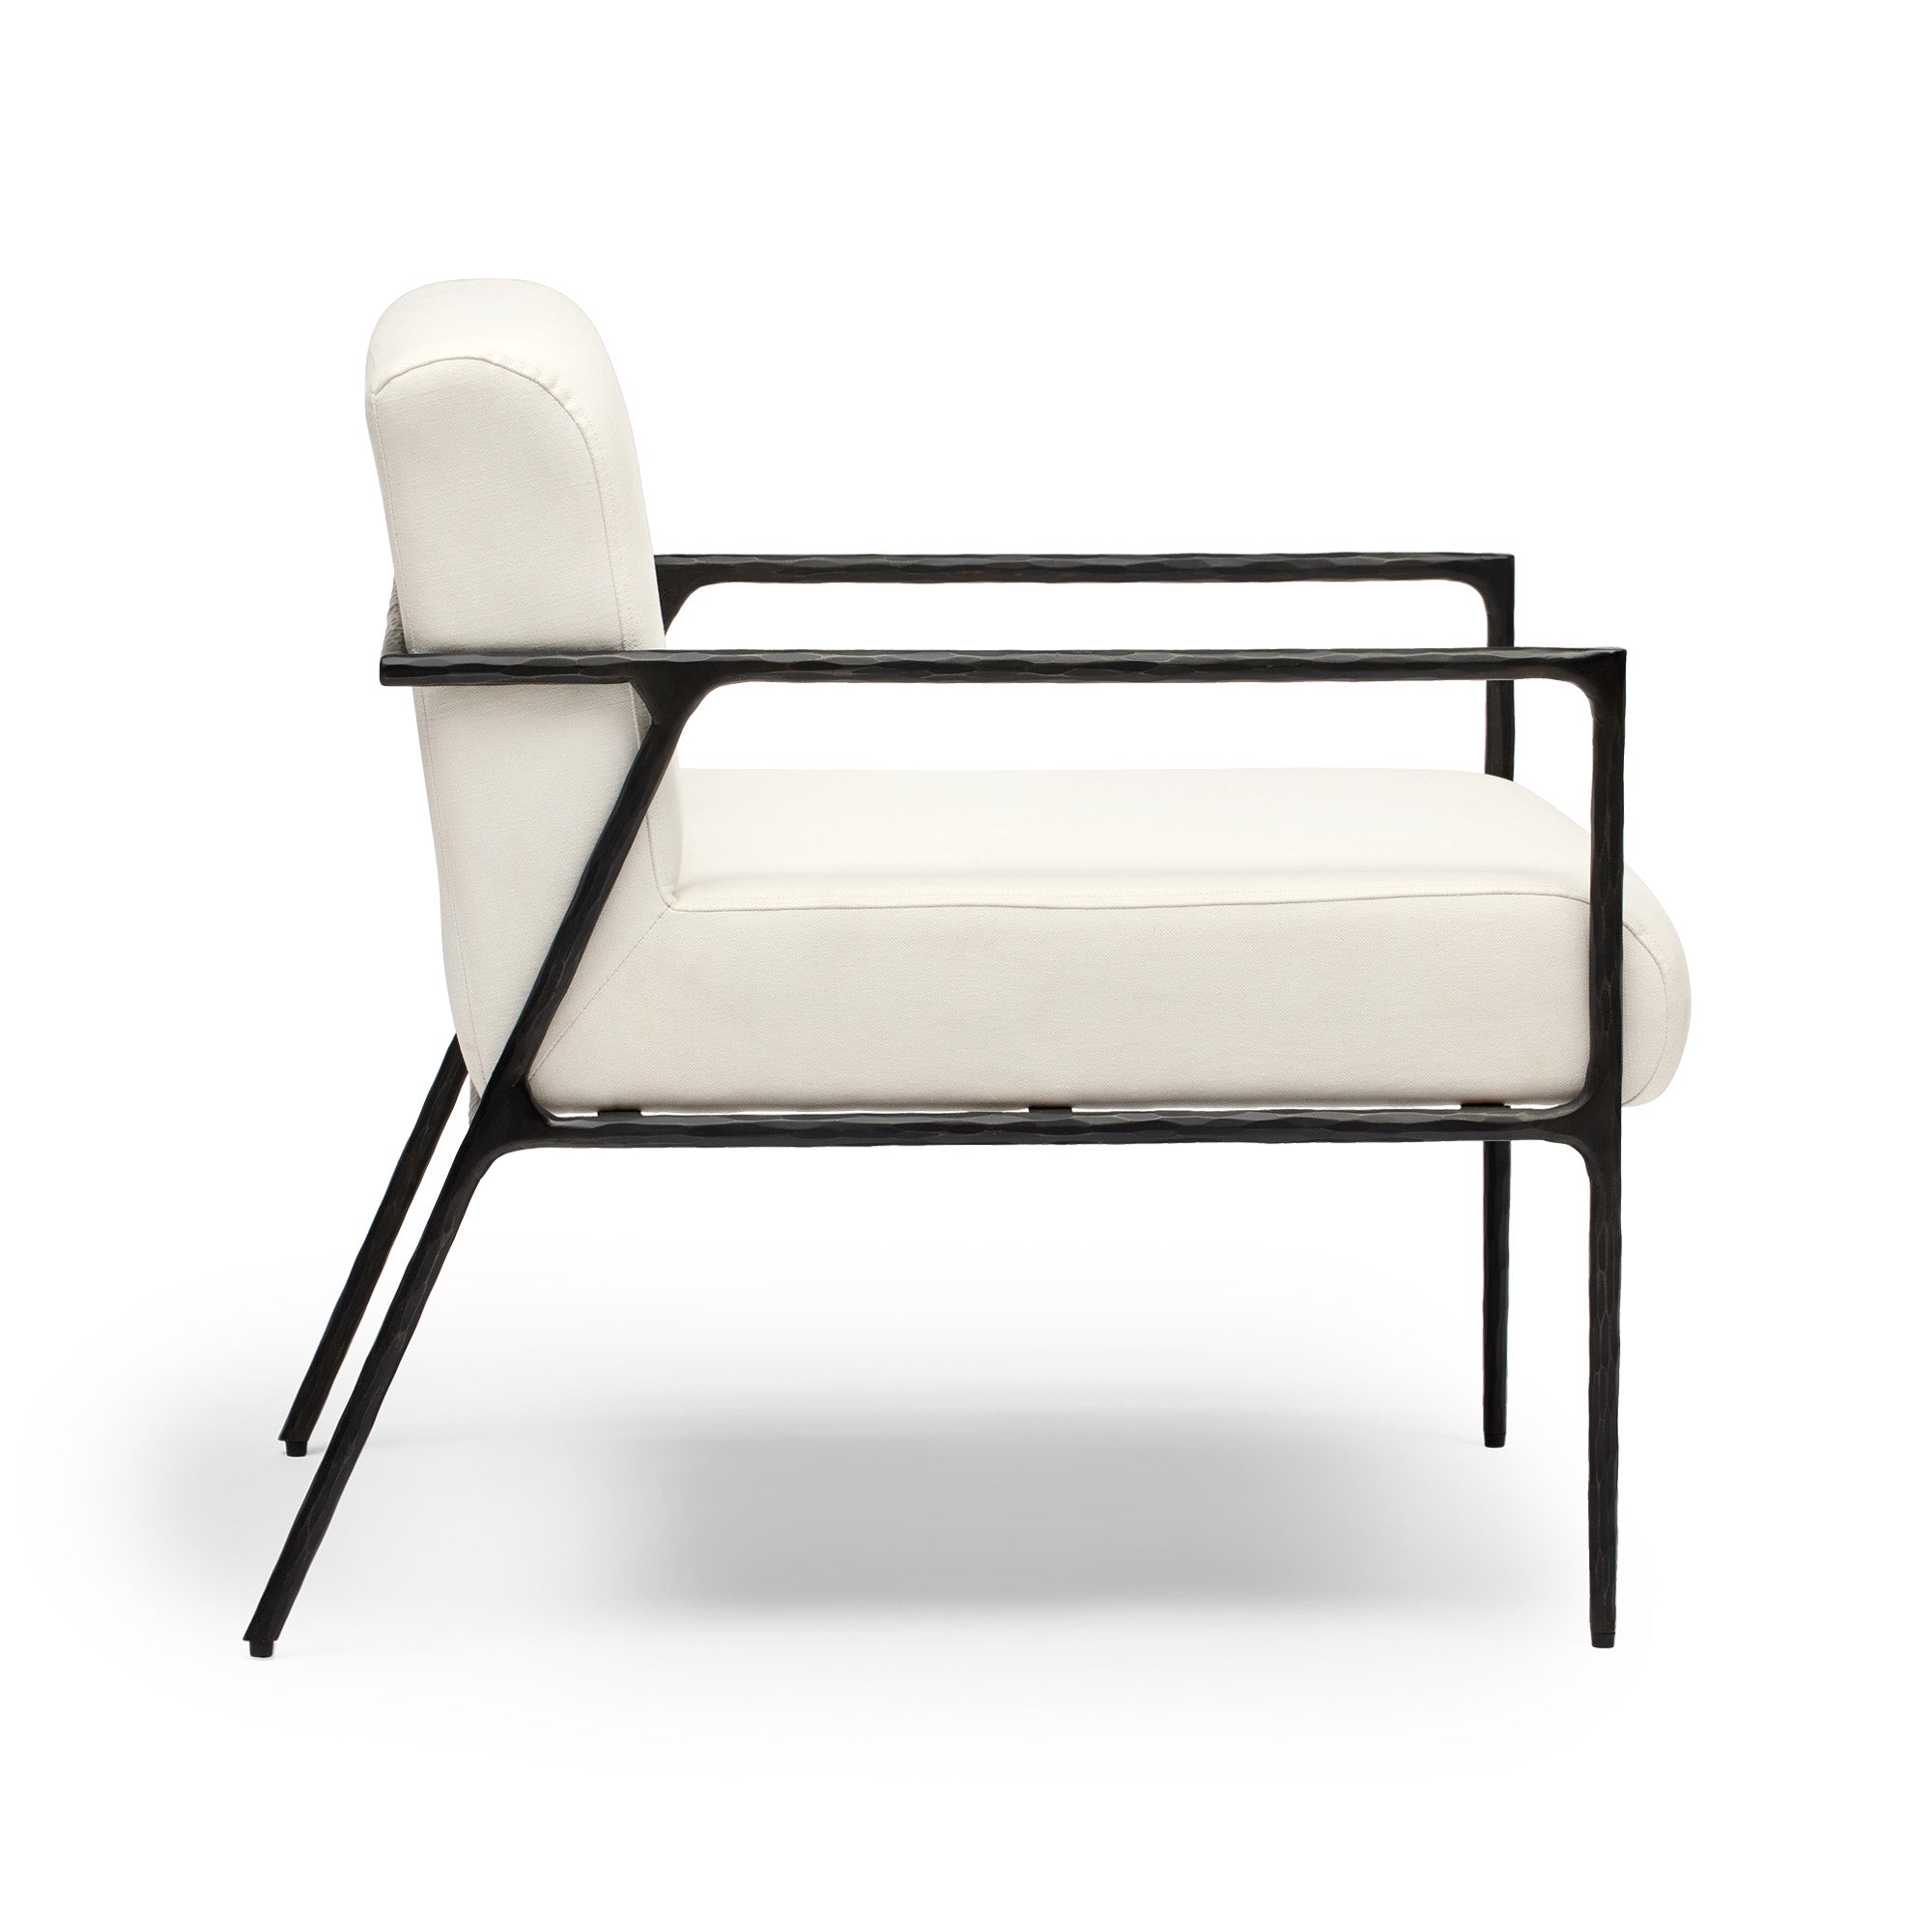 Mila Chair With Arms Ivory & Black Sample